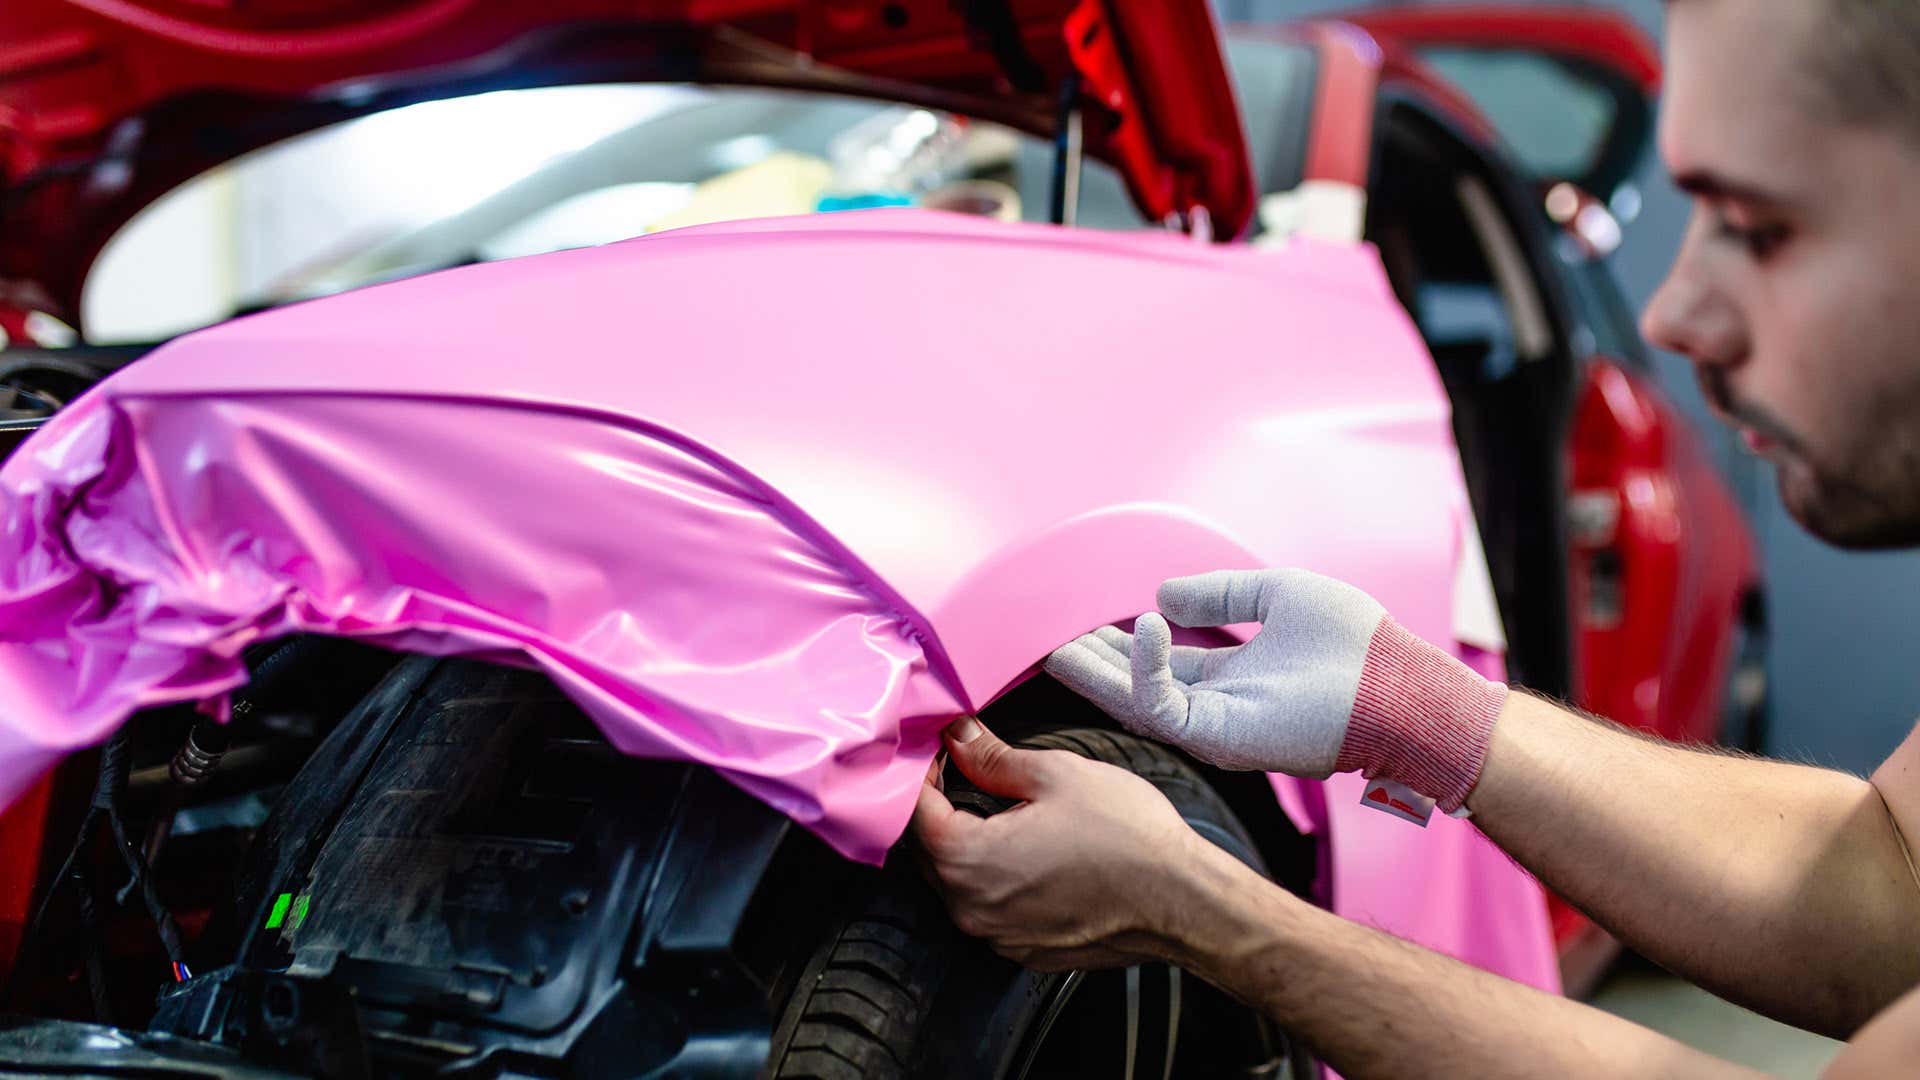 Installers use lintless gloves to apply vinyl wraps to cars.